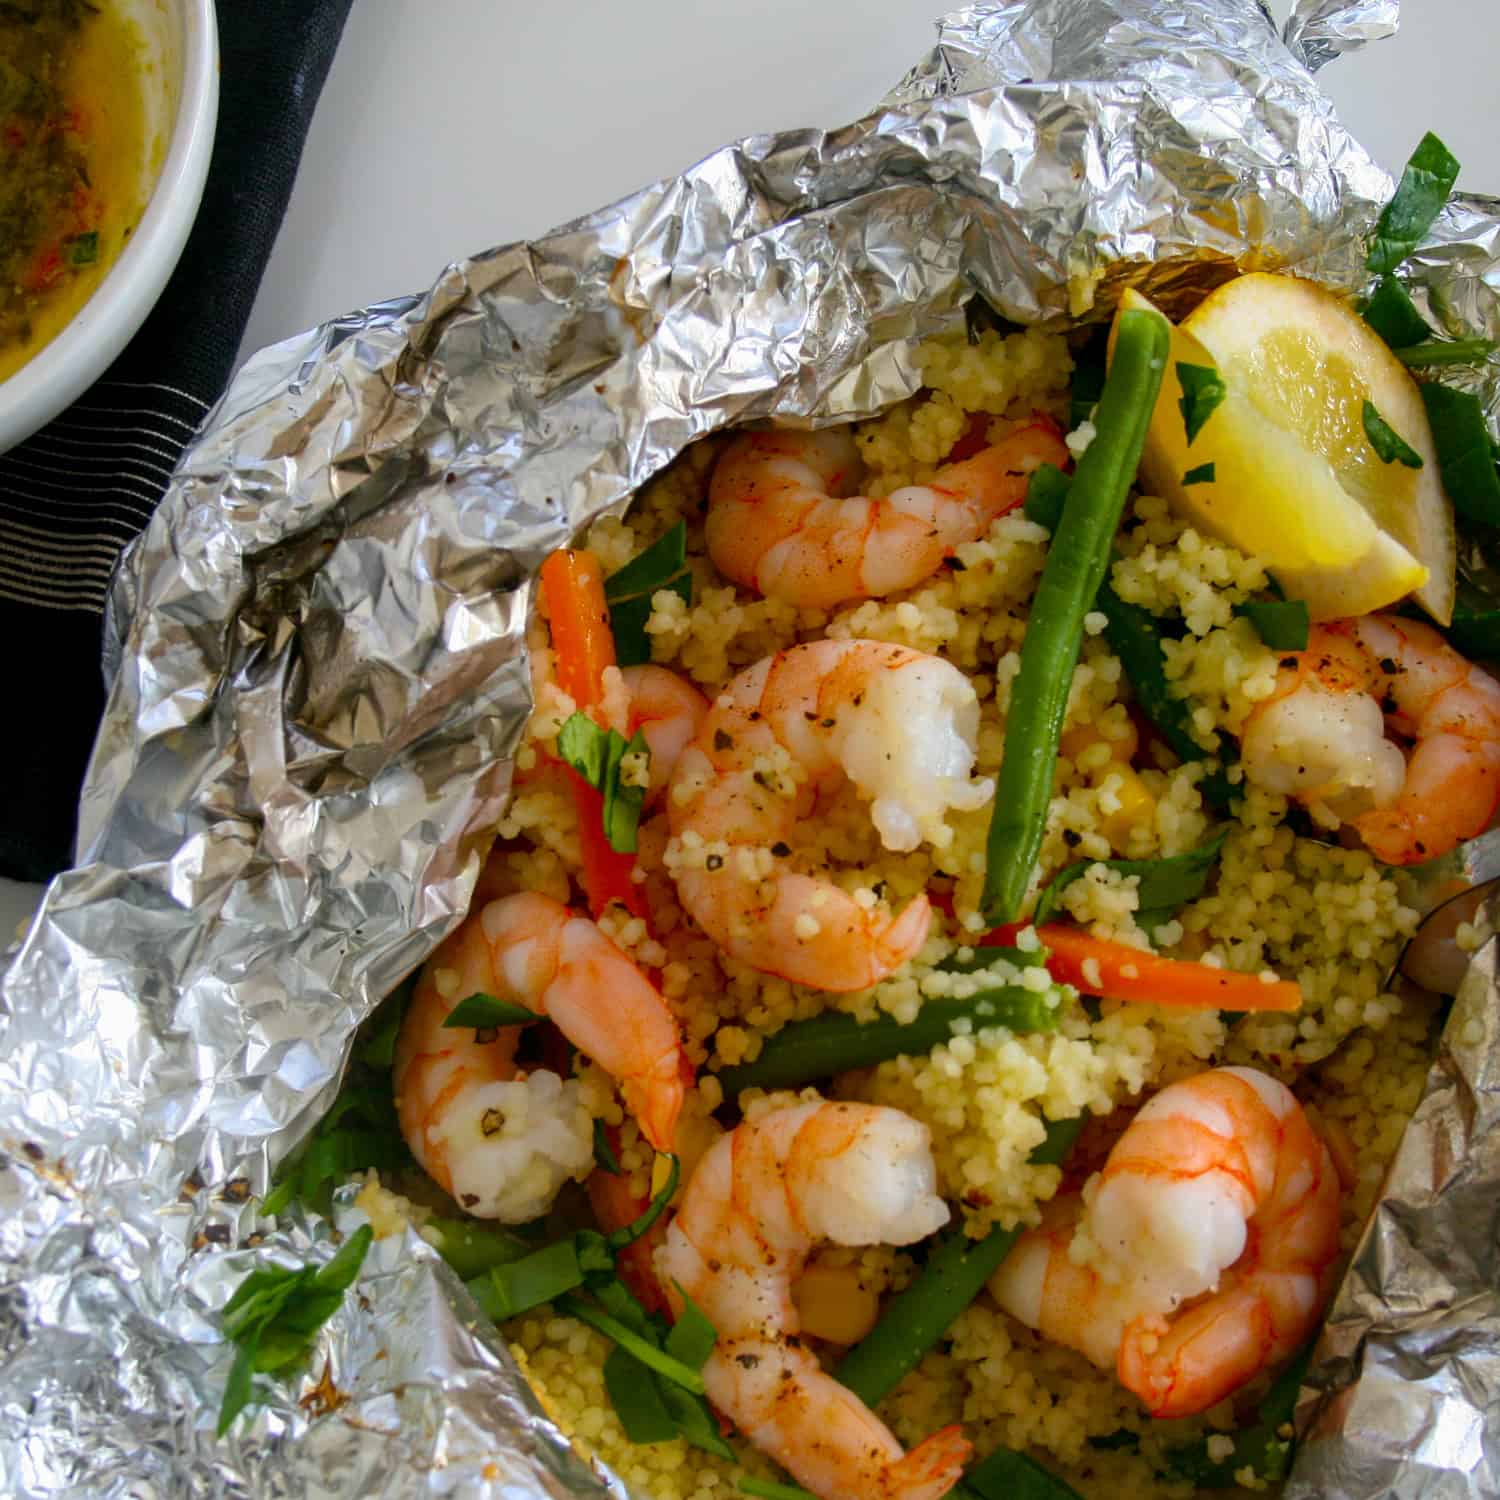 Are you ready to try something new? Give these easy, 30 minute, all-in-one foil wrapped dinners a go. Shrimp with fresh vegetables & seasoned cous cous all smothered in parsley, lemon and garlic sauce and tightly wrapped (to seal in that flavour) in individual foil packets.